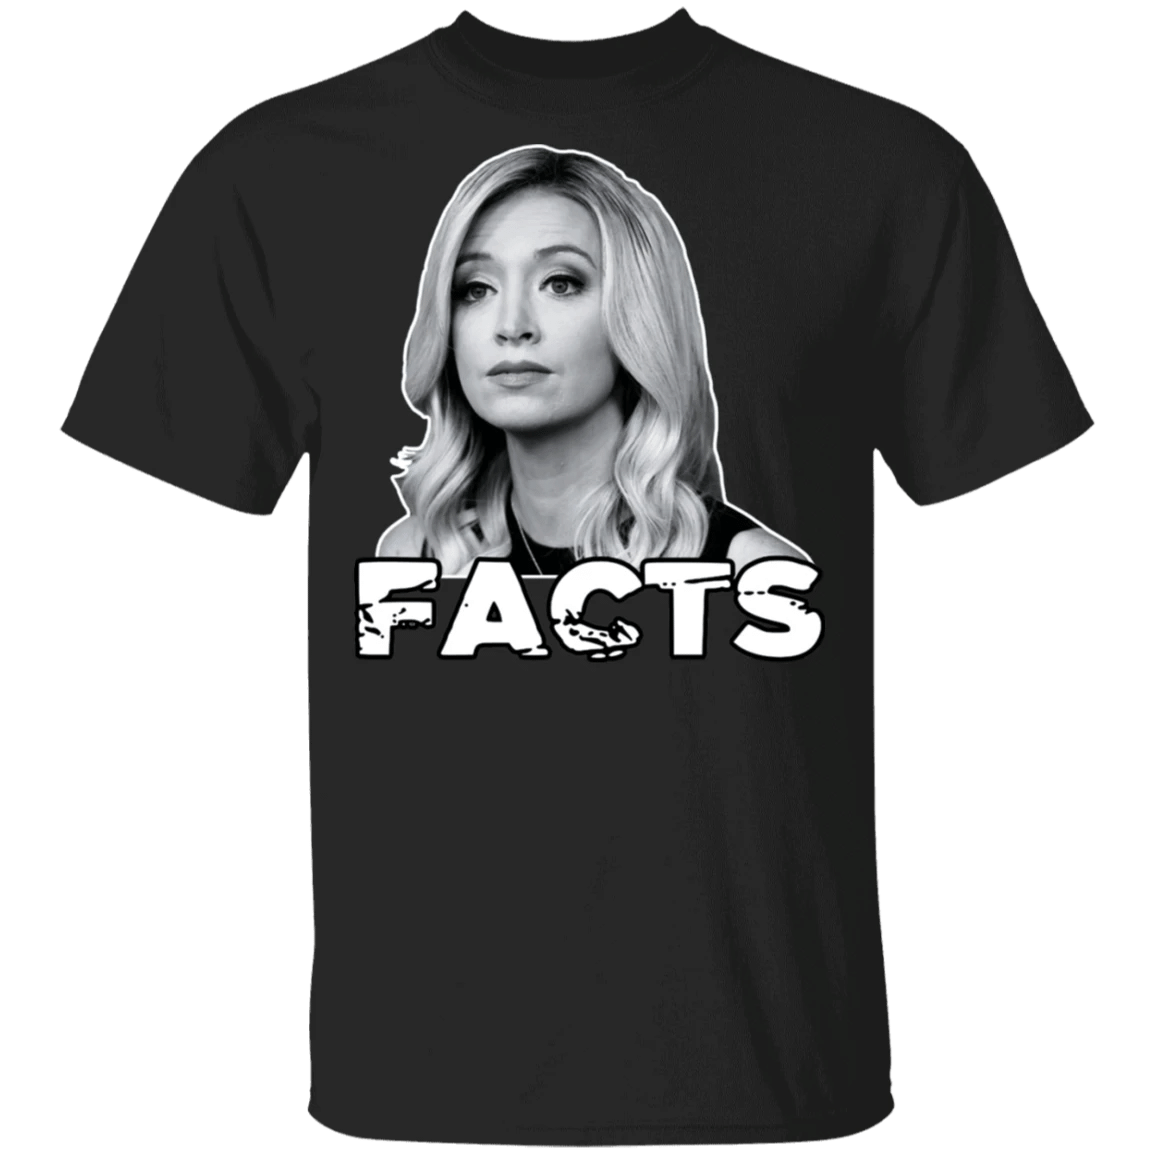 Kayleigh Mcenany Facts Classic T-Shirt White House Press Secretary Mcenany Shirt For Sale